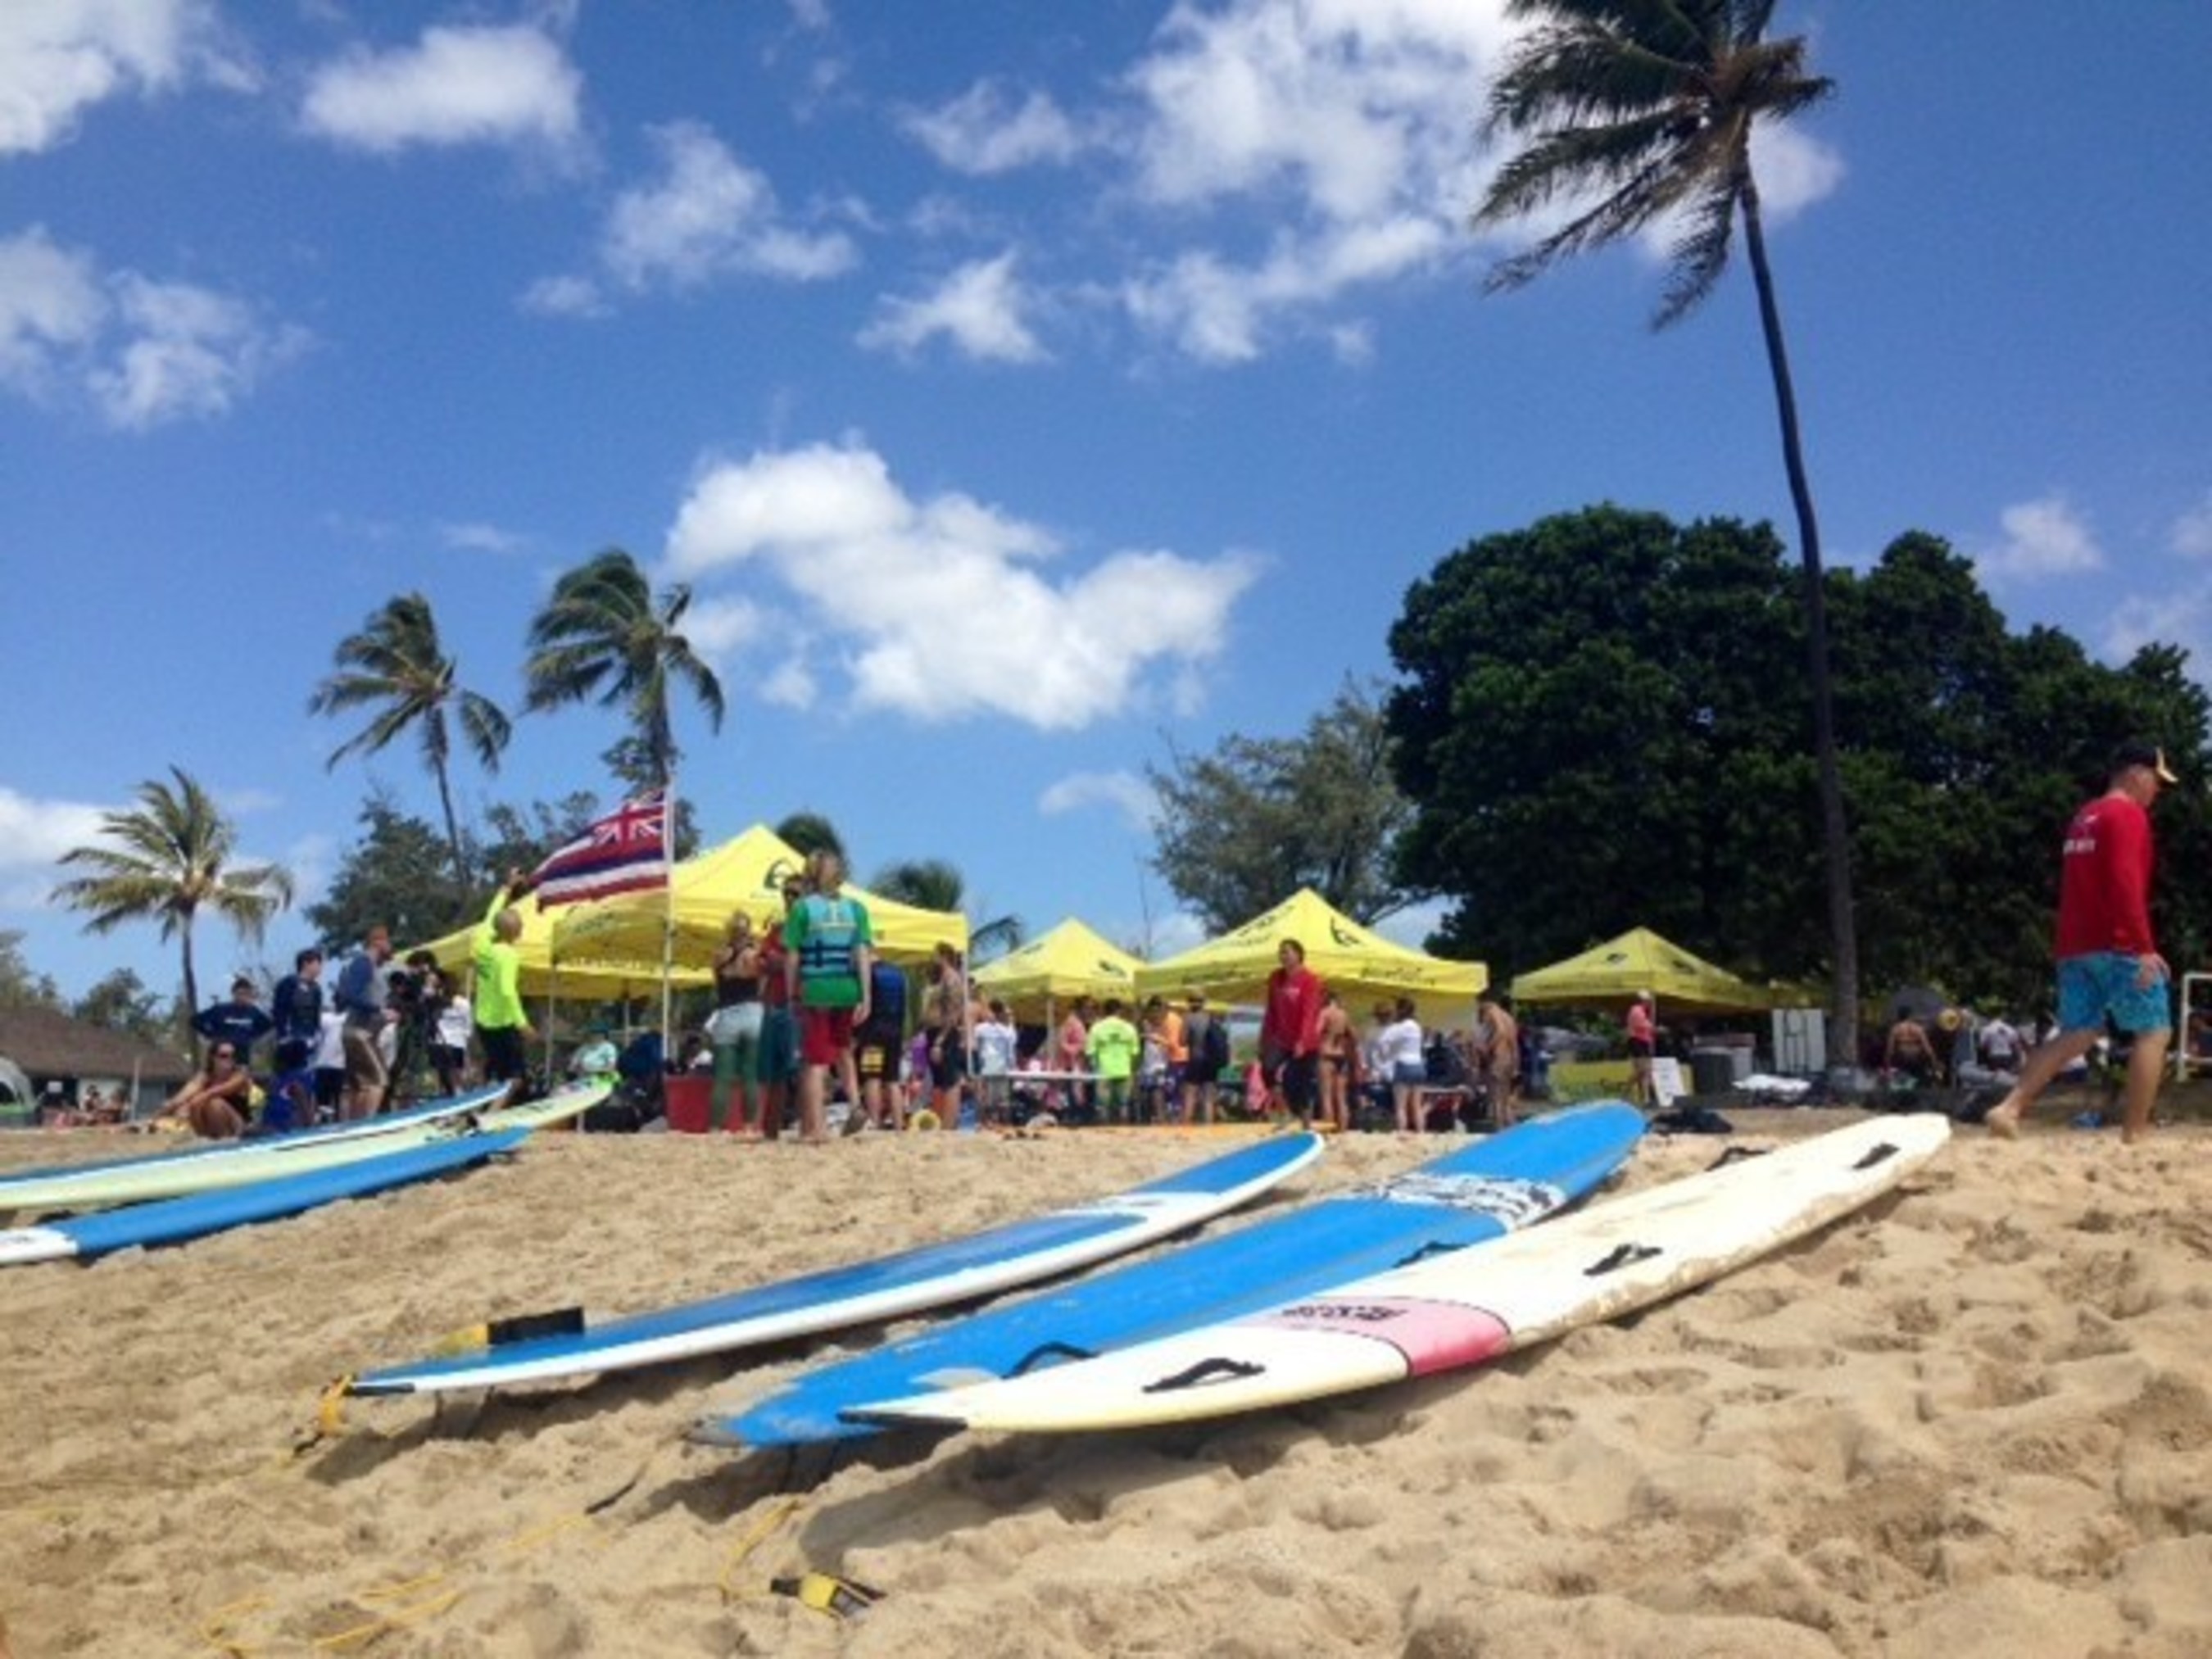 Injured veterans recently enjoyed water activities including adaptive surfing, shoreline flotation, and swimming at a volunteer event with Wounded Warrior Project in Ewa Beach, Hawaii.